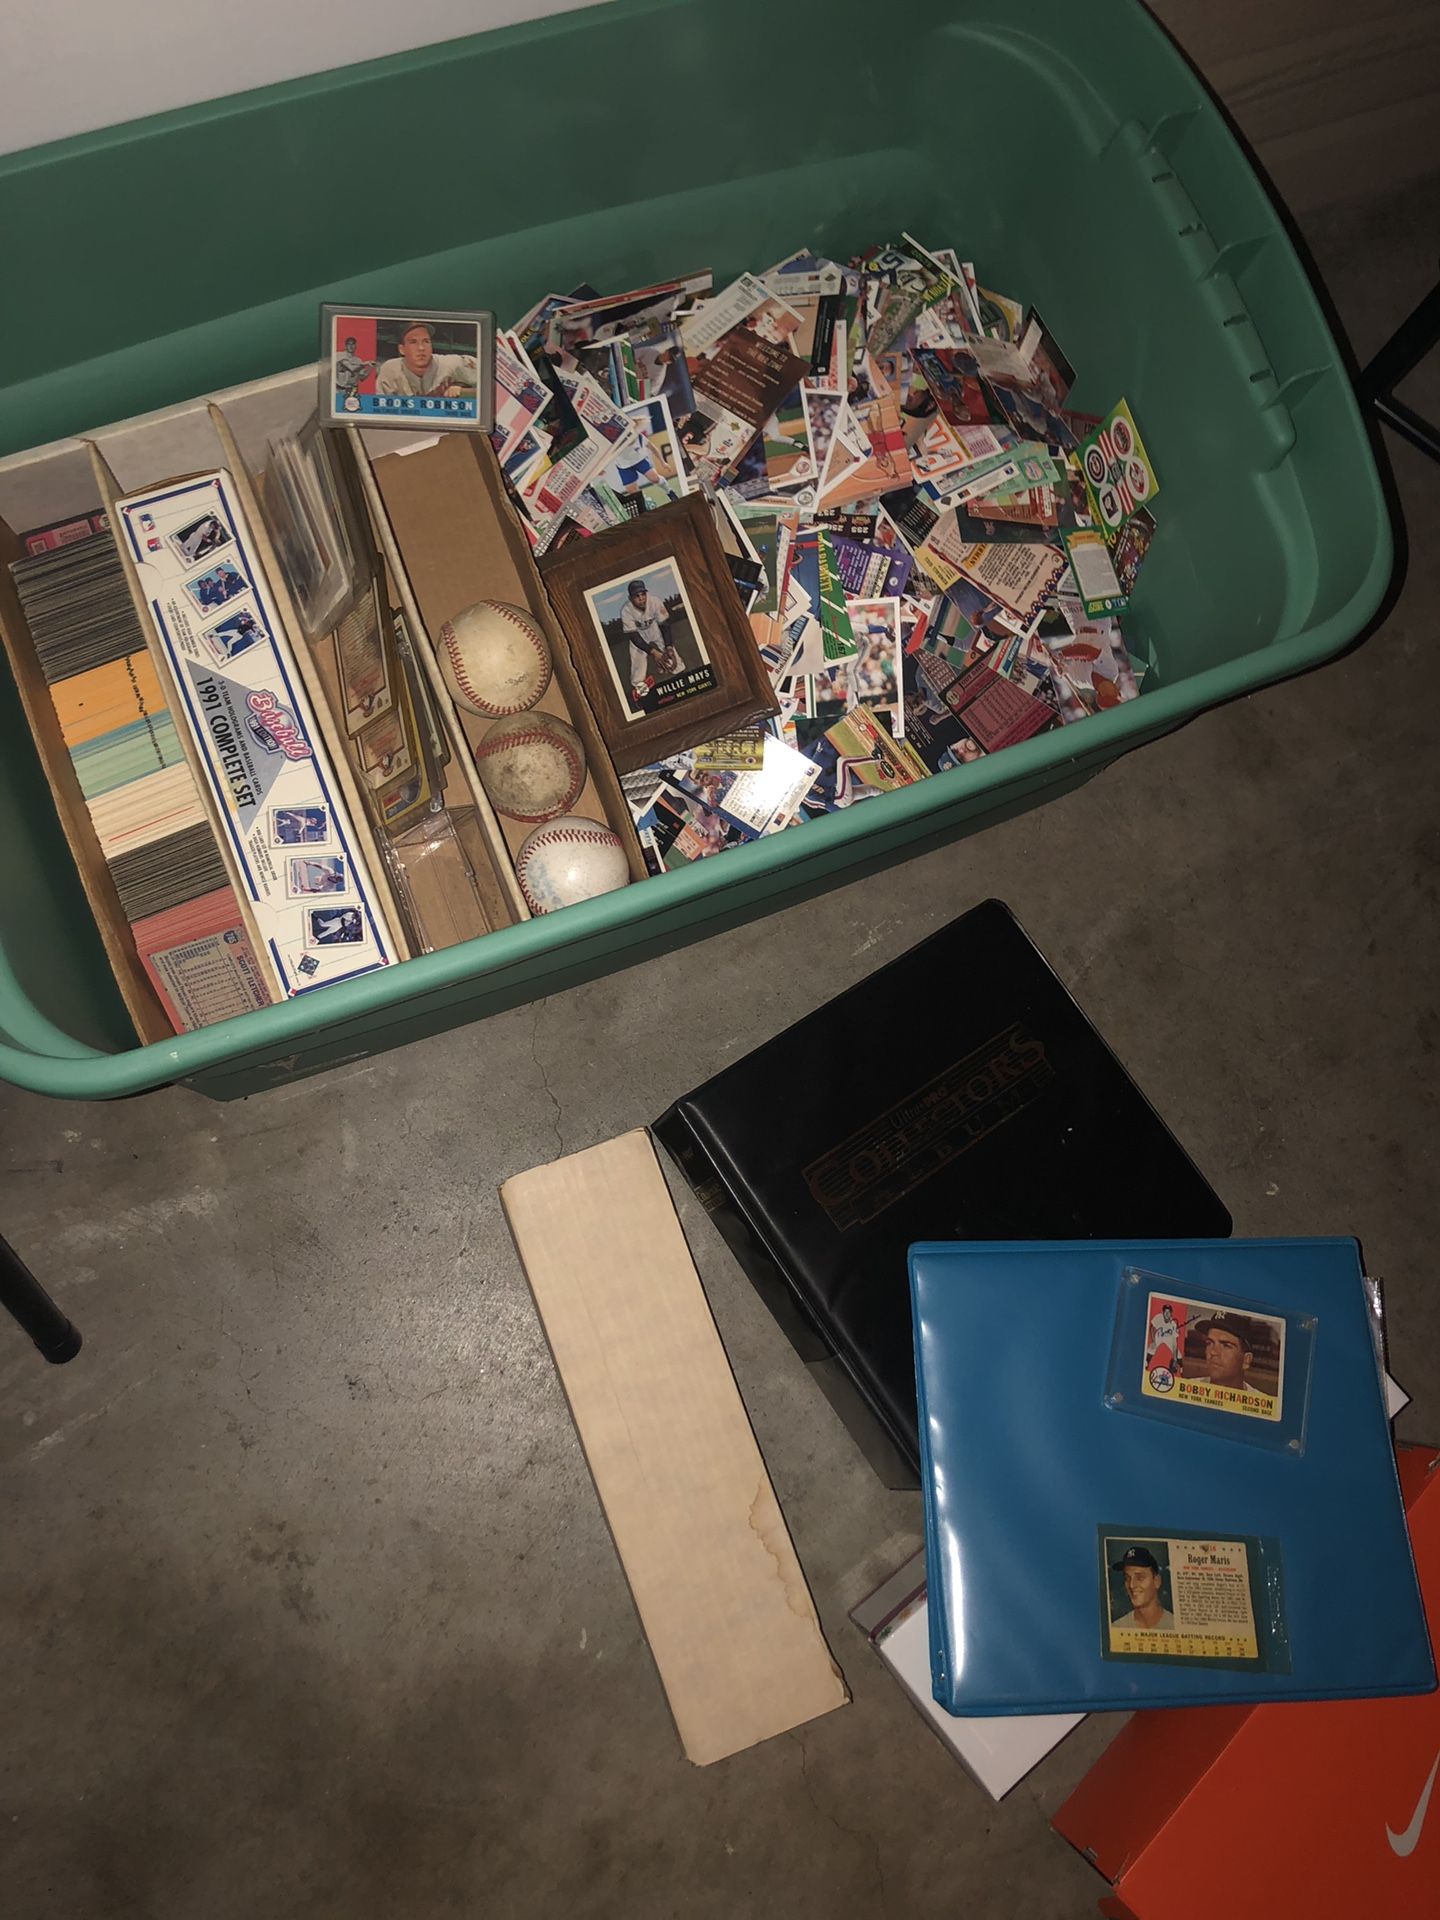 HUGE TUB OF BASEBALL ⚾️ CARDS, ROOKIE CARDS, CARDS FROM THE 60’s & 70’s, AUTOGRAPHED BASEBALLS AND MORE